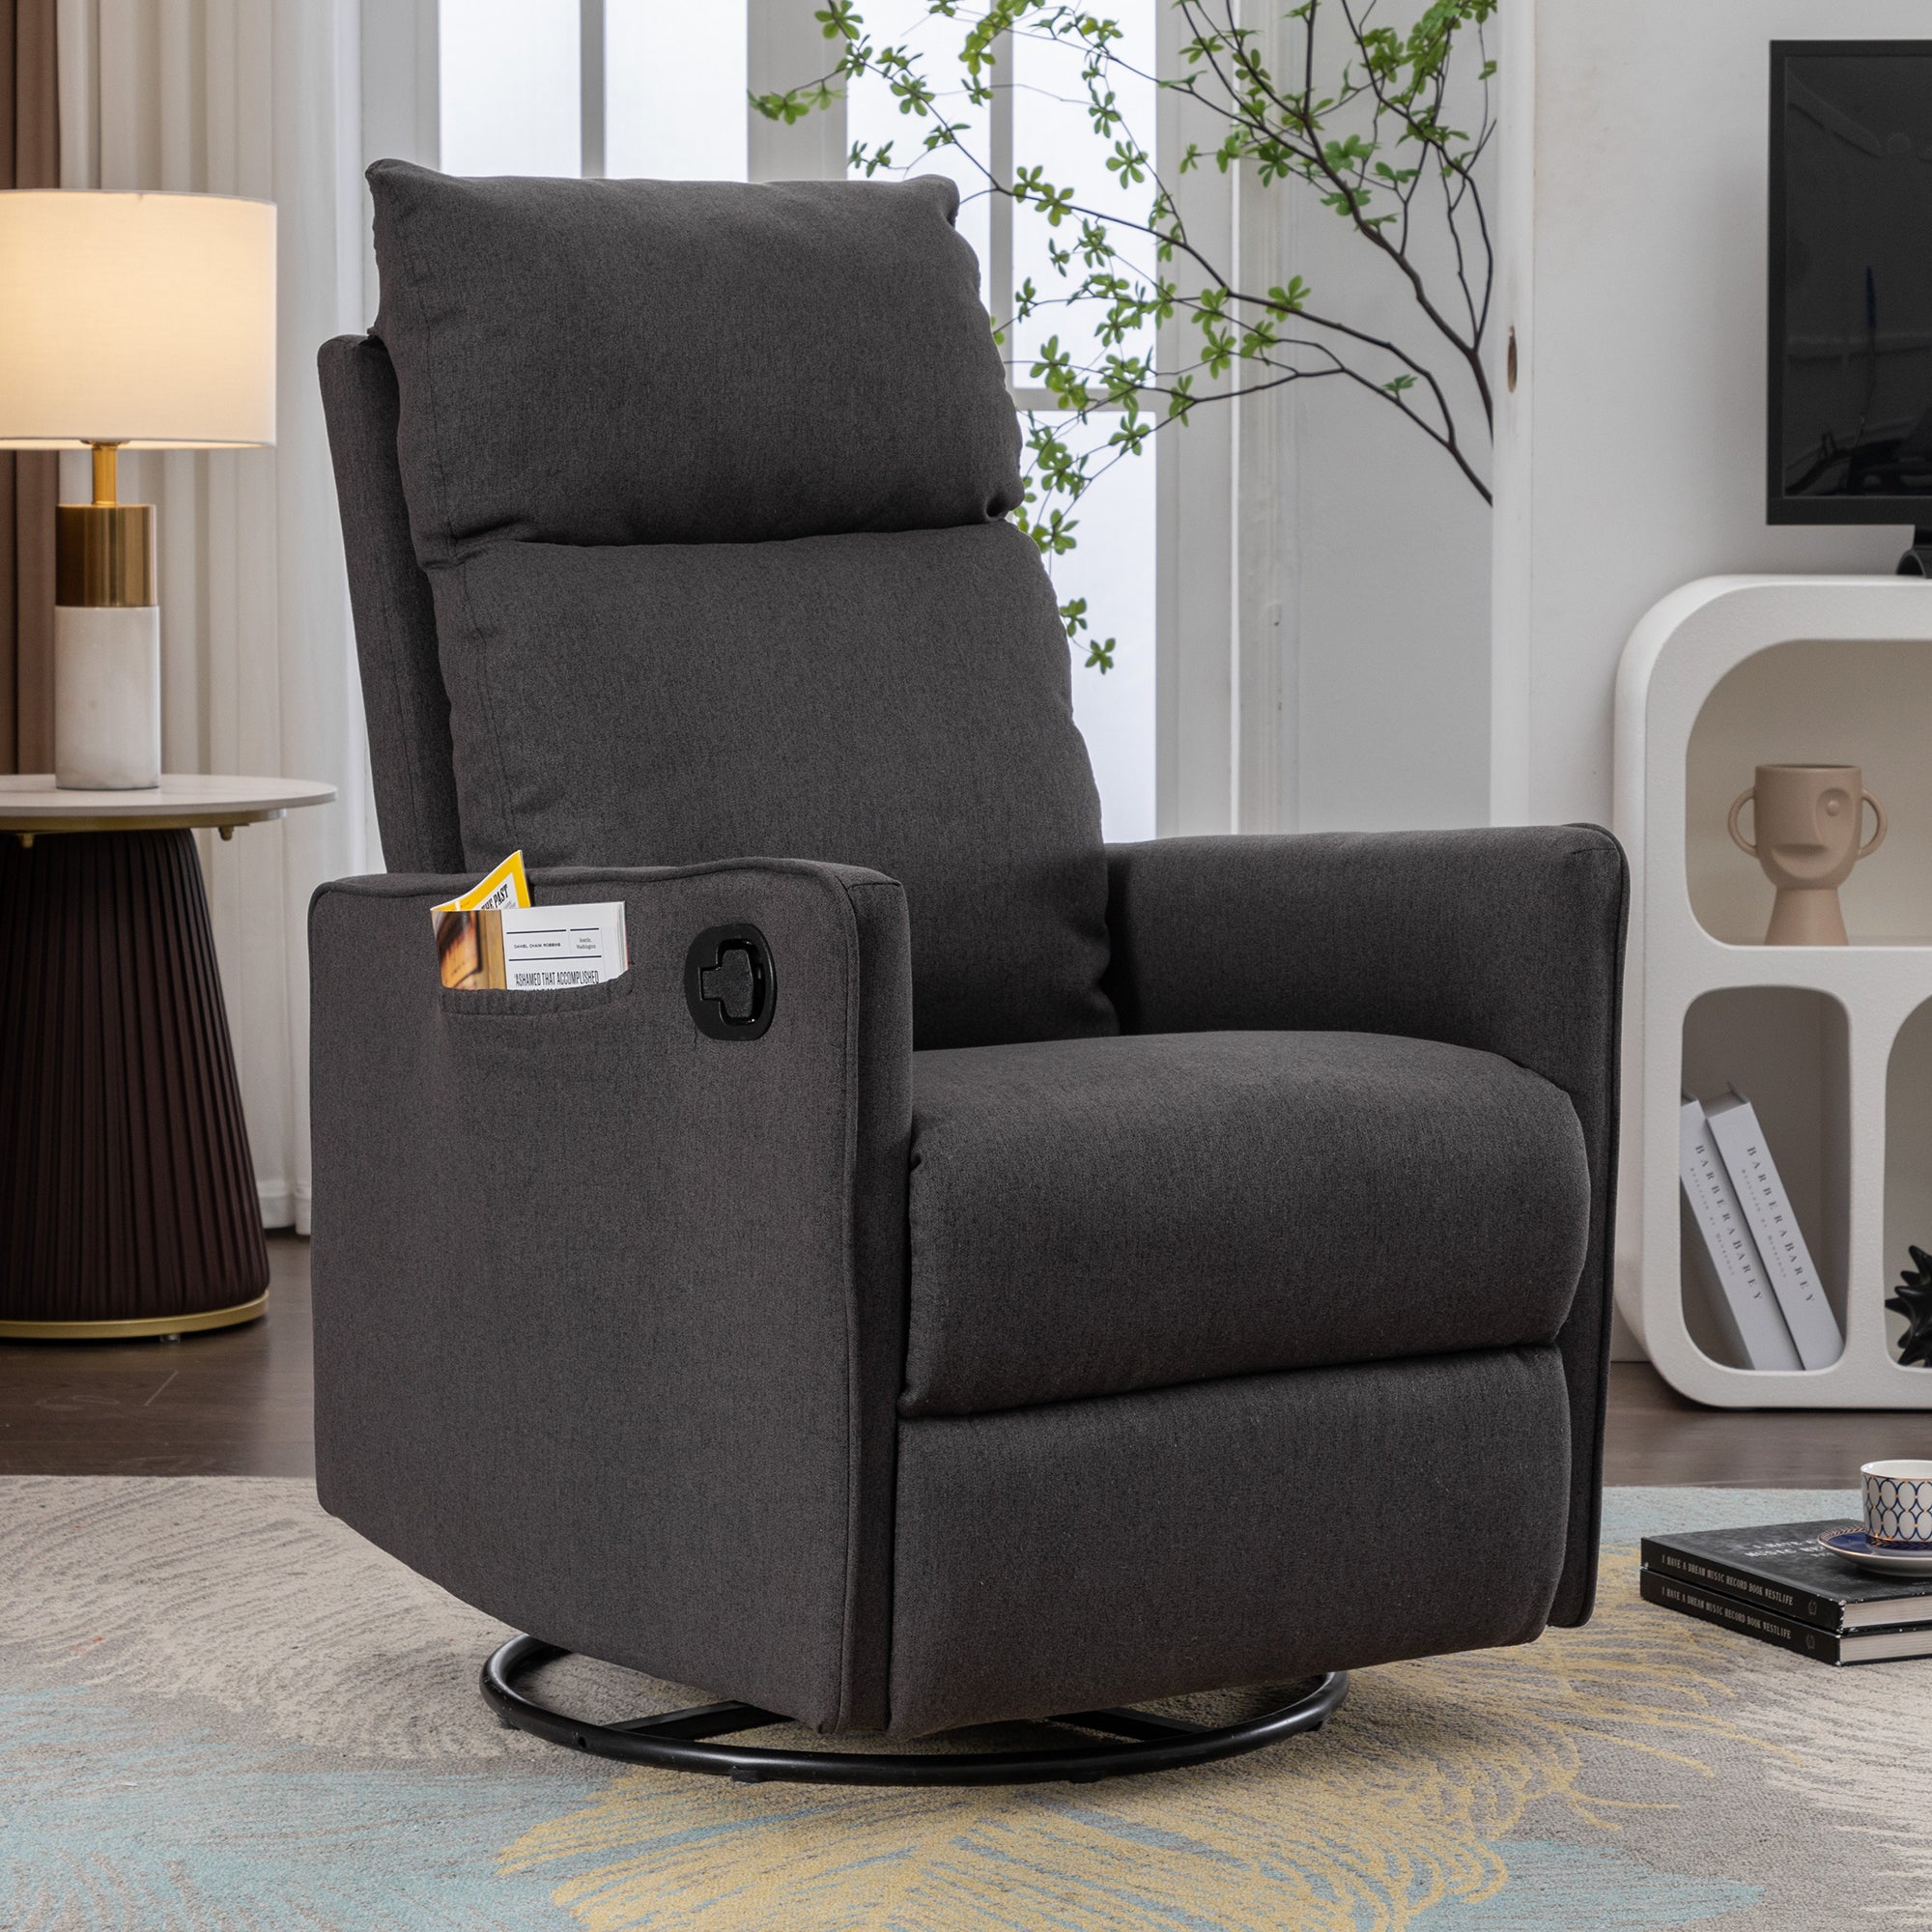 🆓🚛 Cotton Linen Fabric Swivel Rocking Chair Glider Rocker Recliner Nursery Chair With Adjustable Back and Footrest for Living Room Indoor, Dark Gray